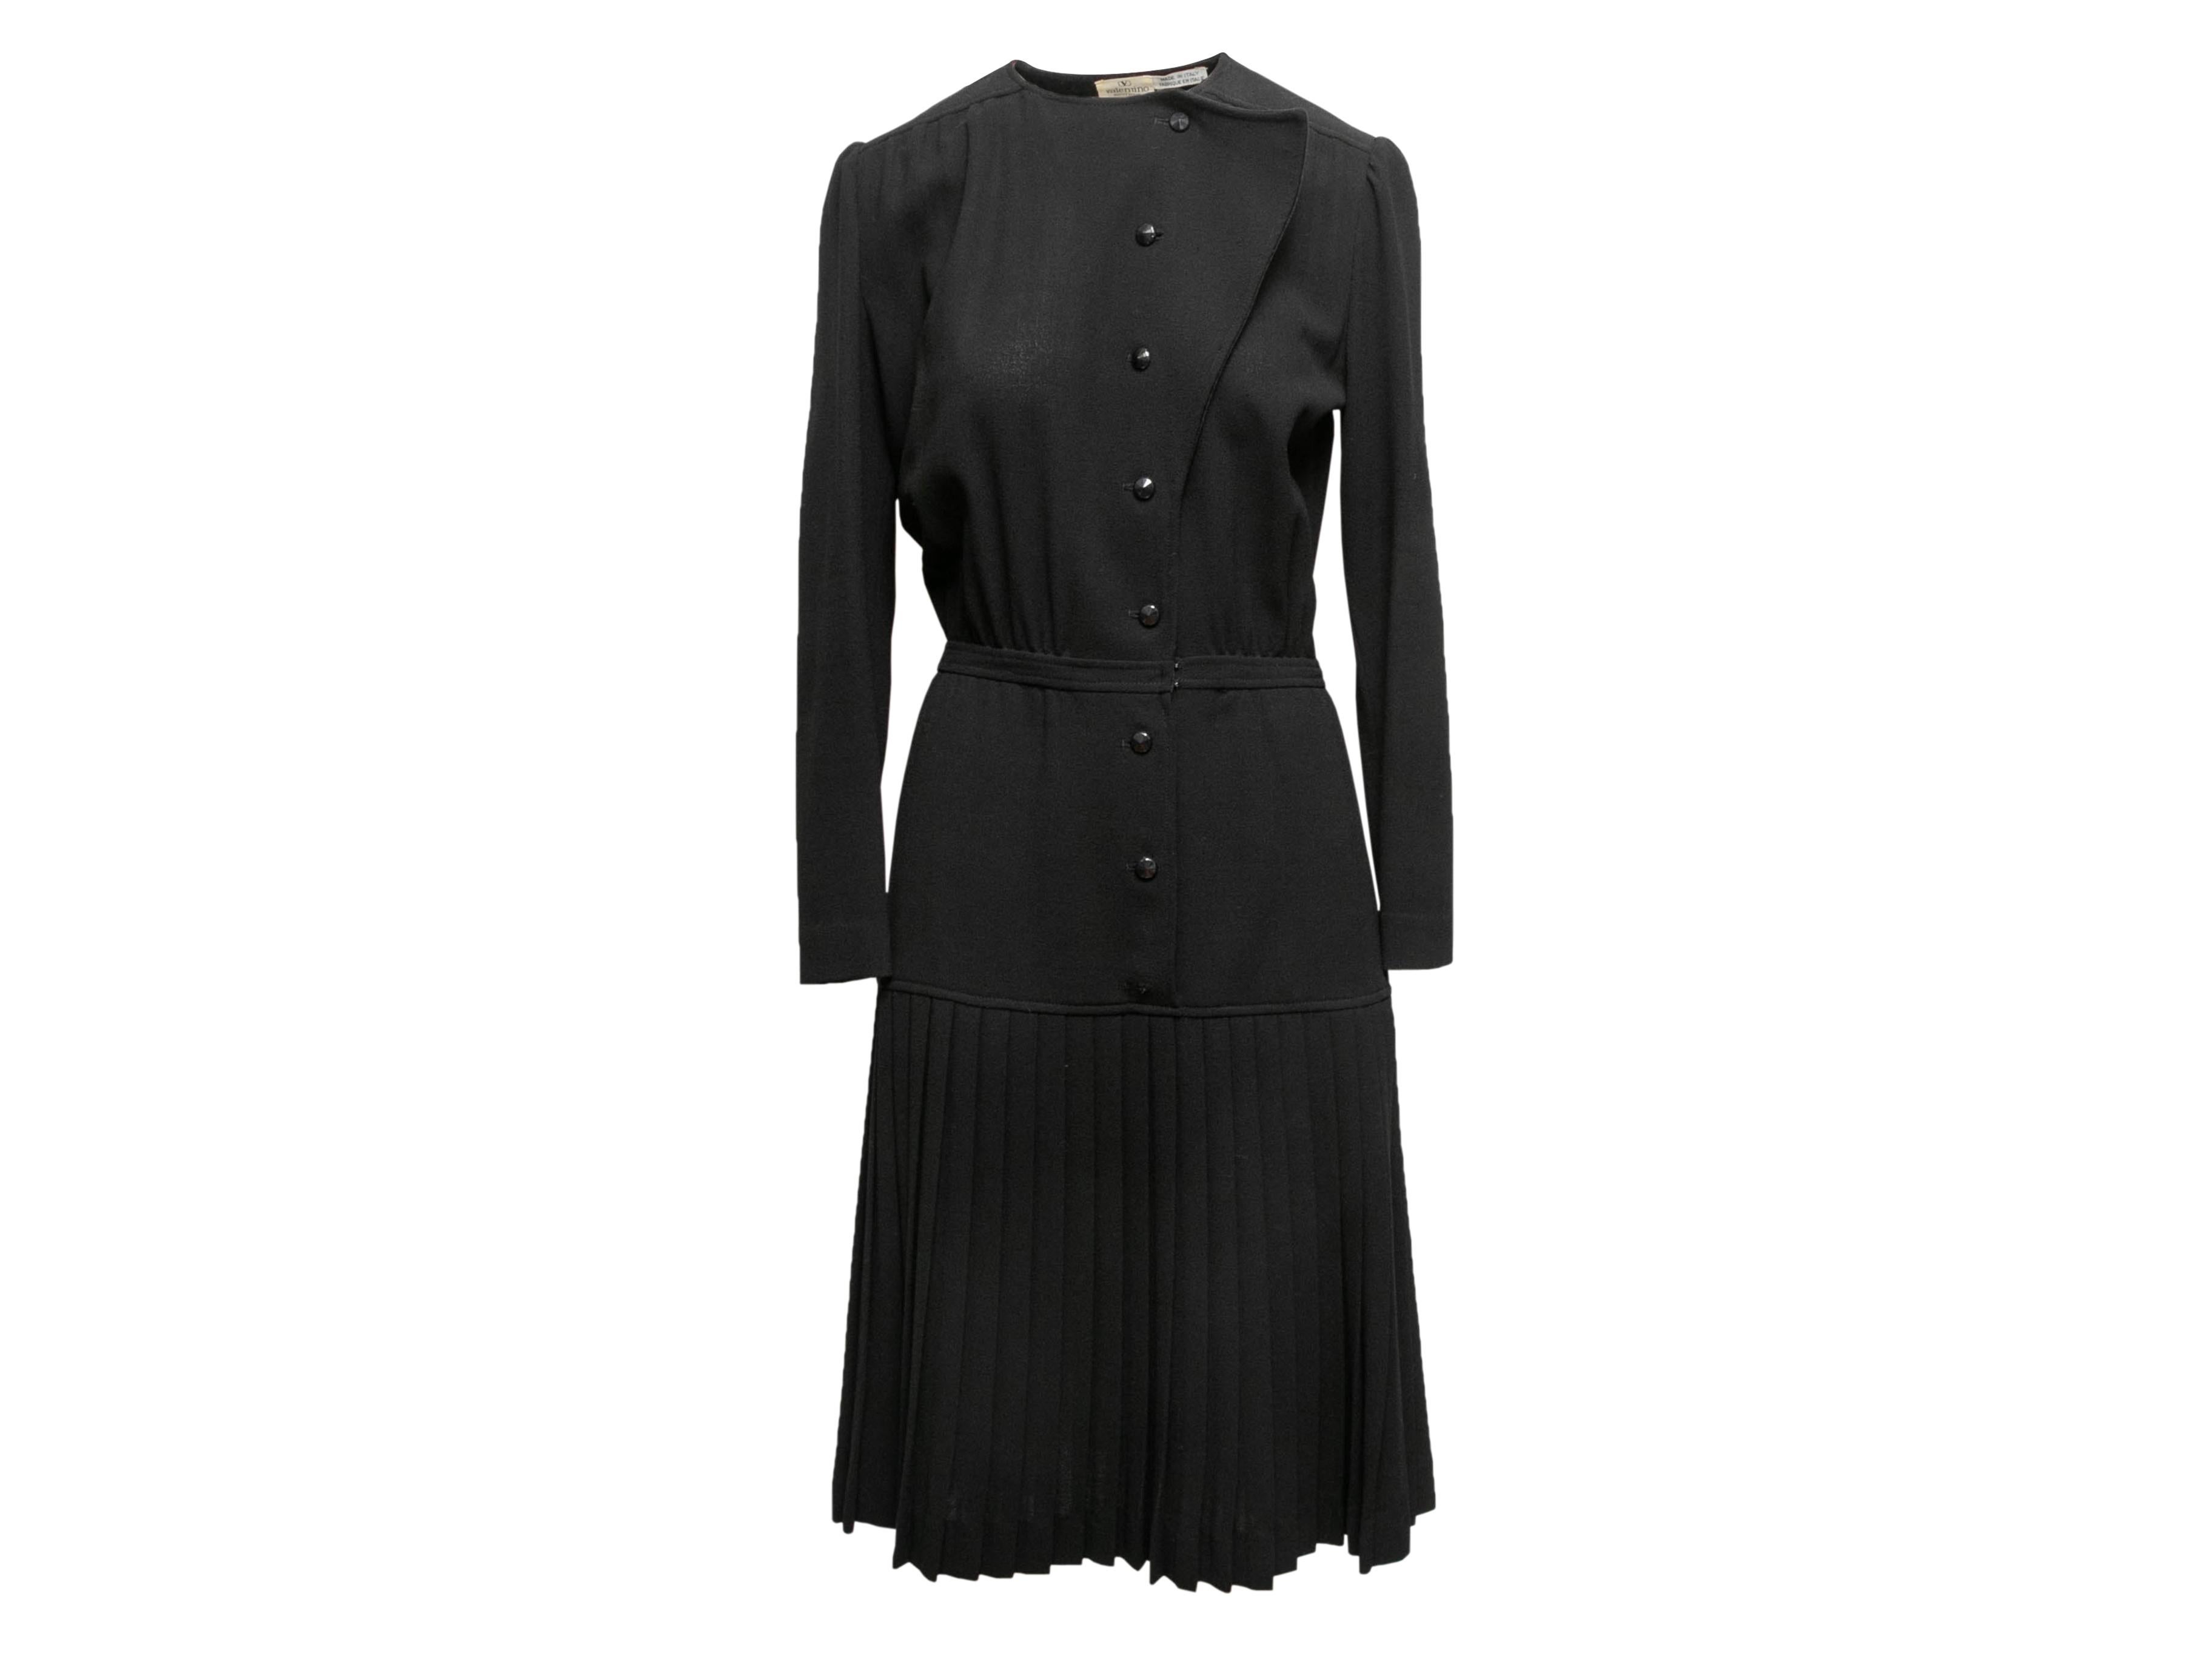 Vintage black pleated long sleeve dress by Valentino Boutique. Crew neck. Button closures at front. 42